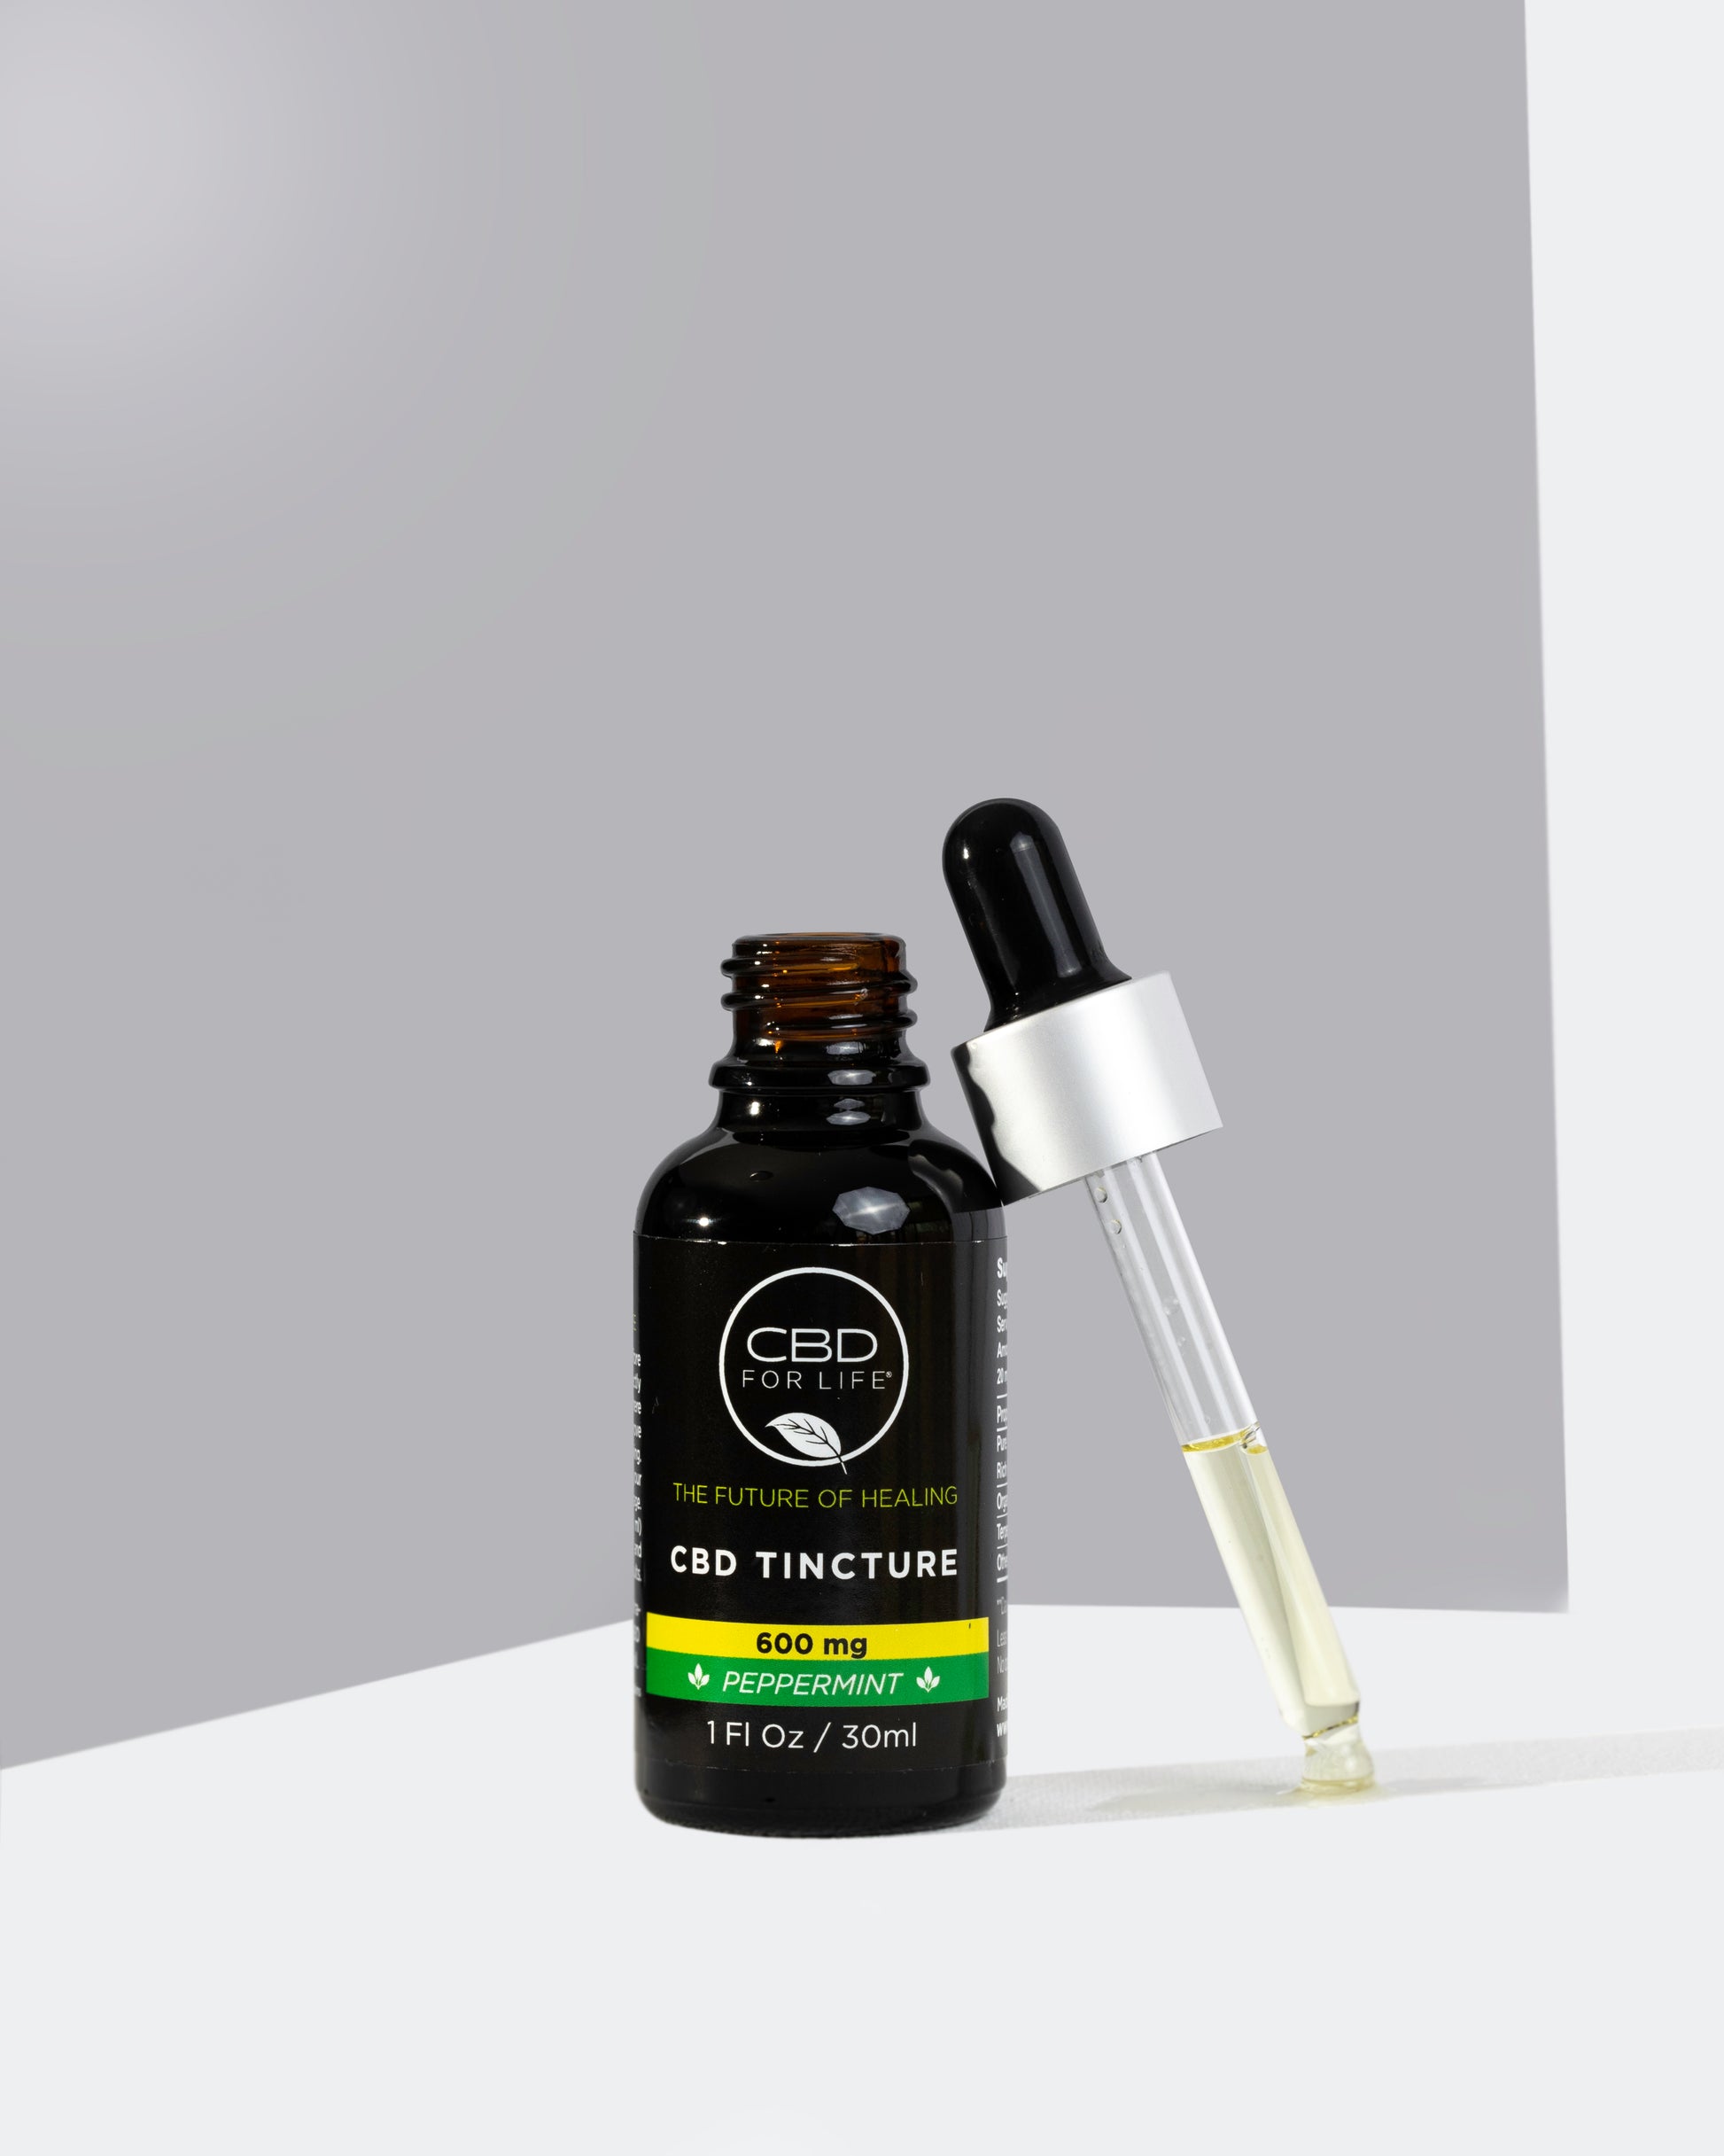 CBD Oil Tinctures: The Benefits of MCT Oil